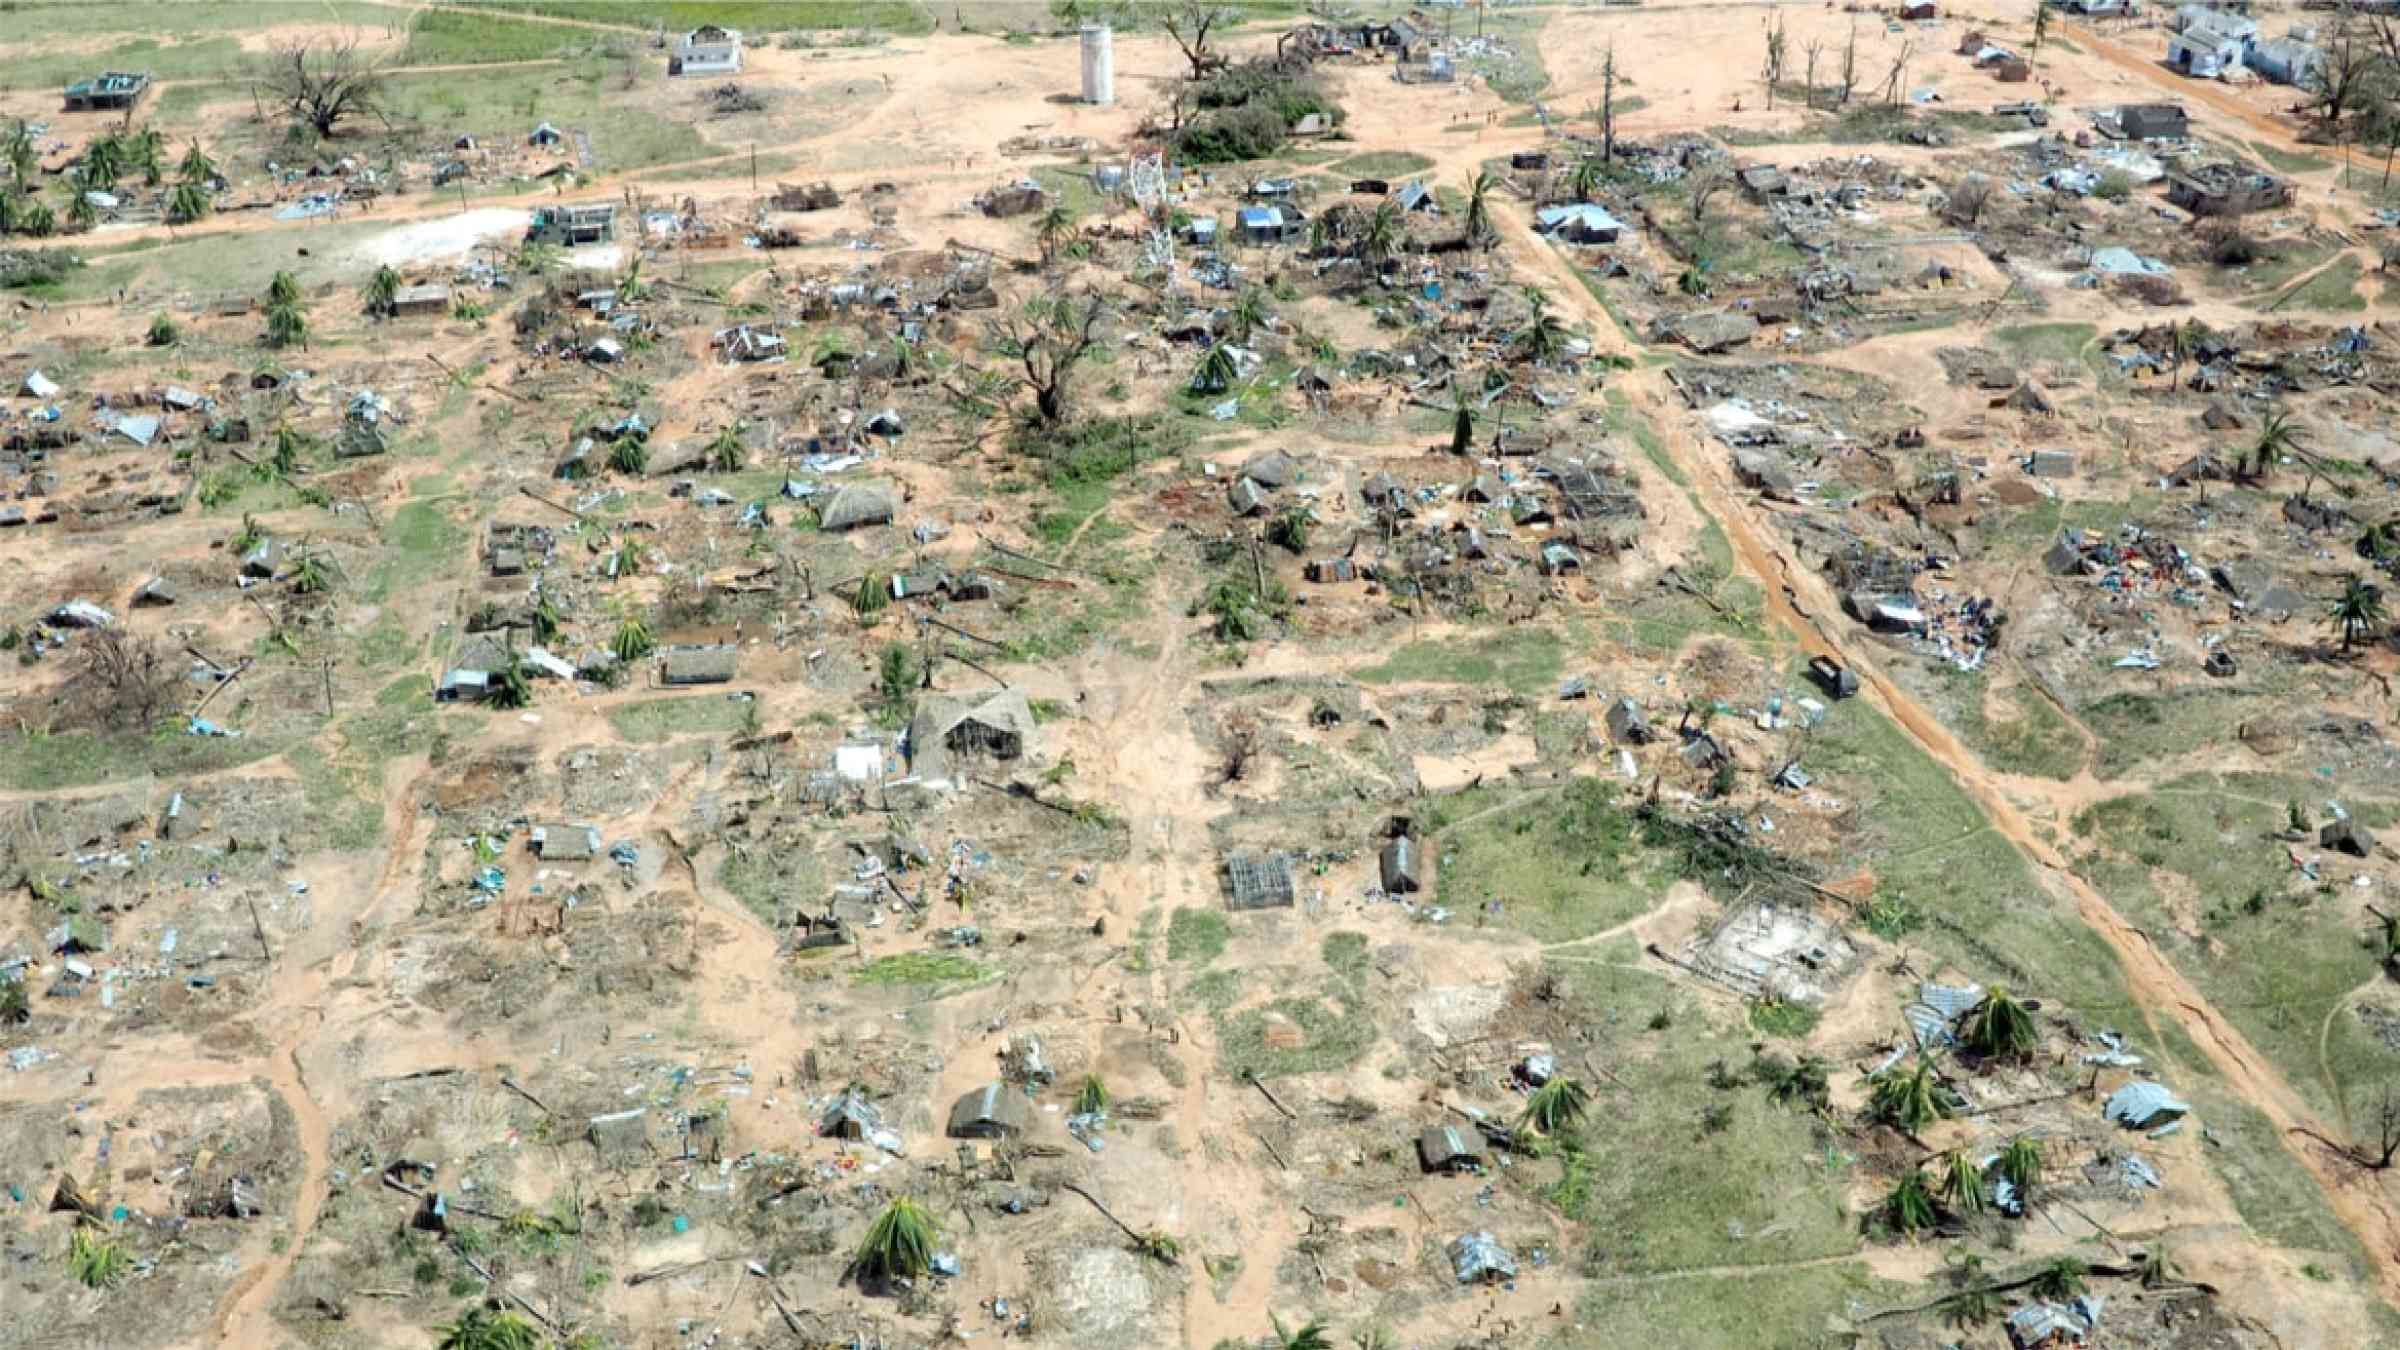 Aerial view of a devastated fishing village after Cyclone Kenneth in northern Mozambique (2019)